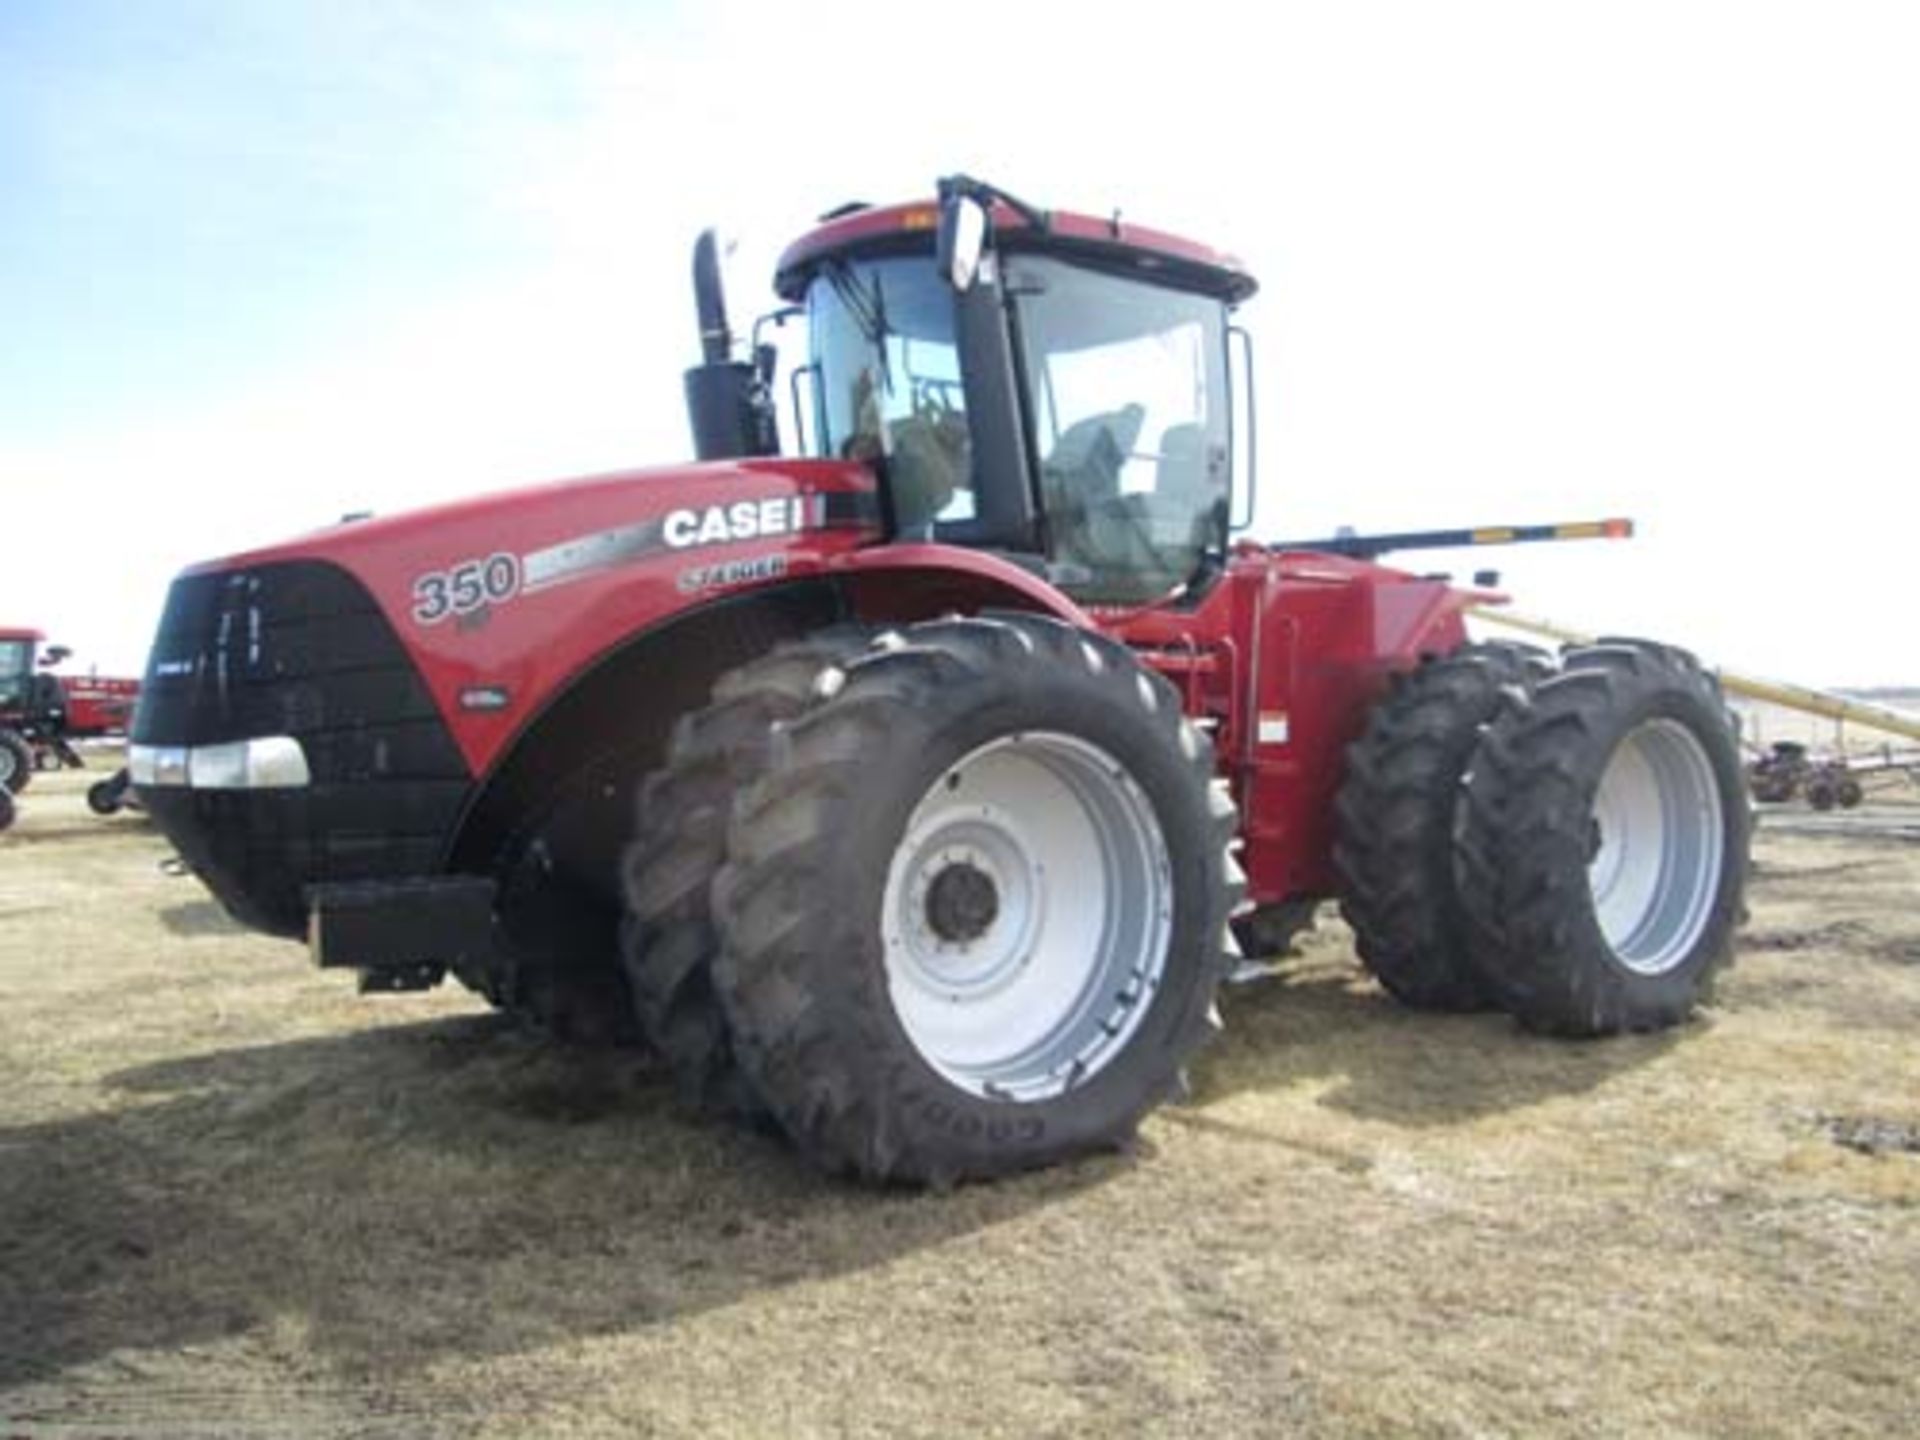 2011 CASE IH Steiger 350 HD 4wd Tractor - Image 4 of 11